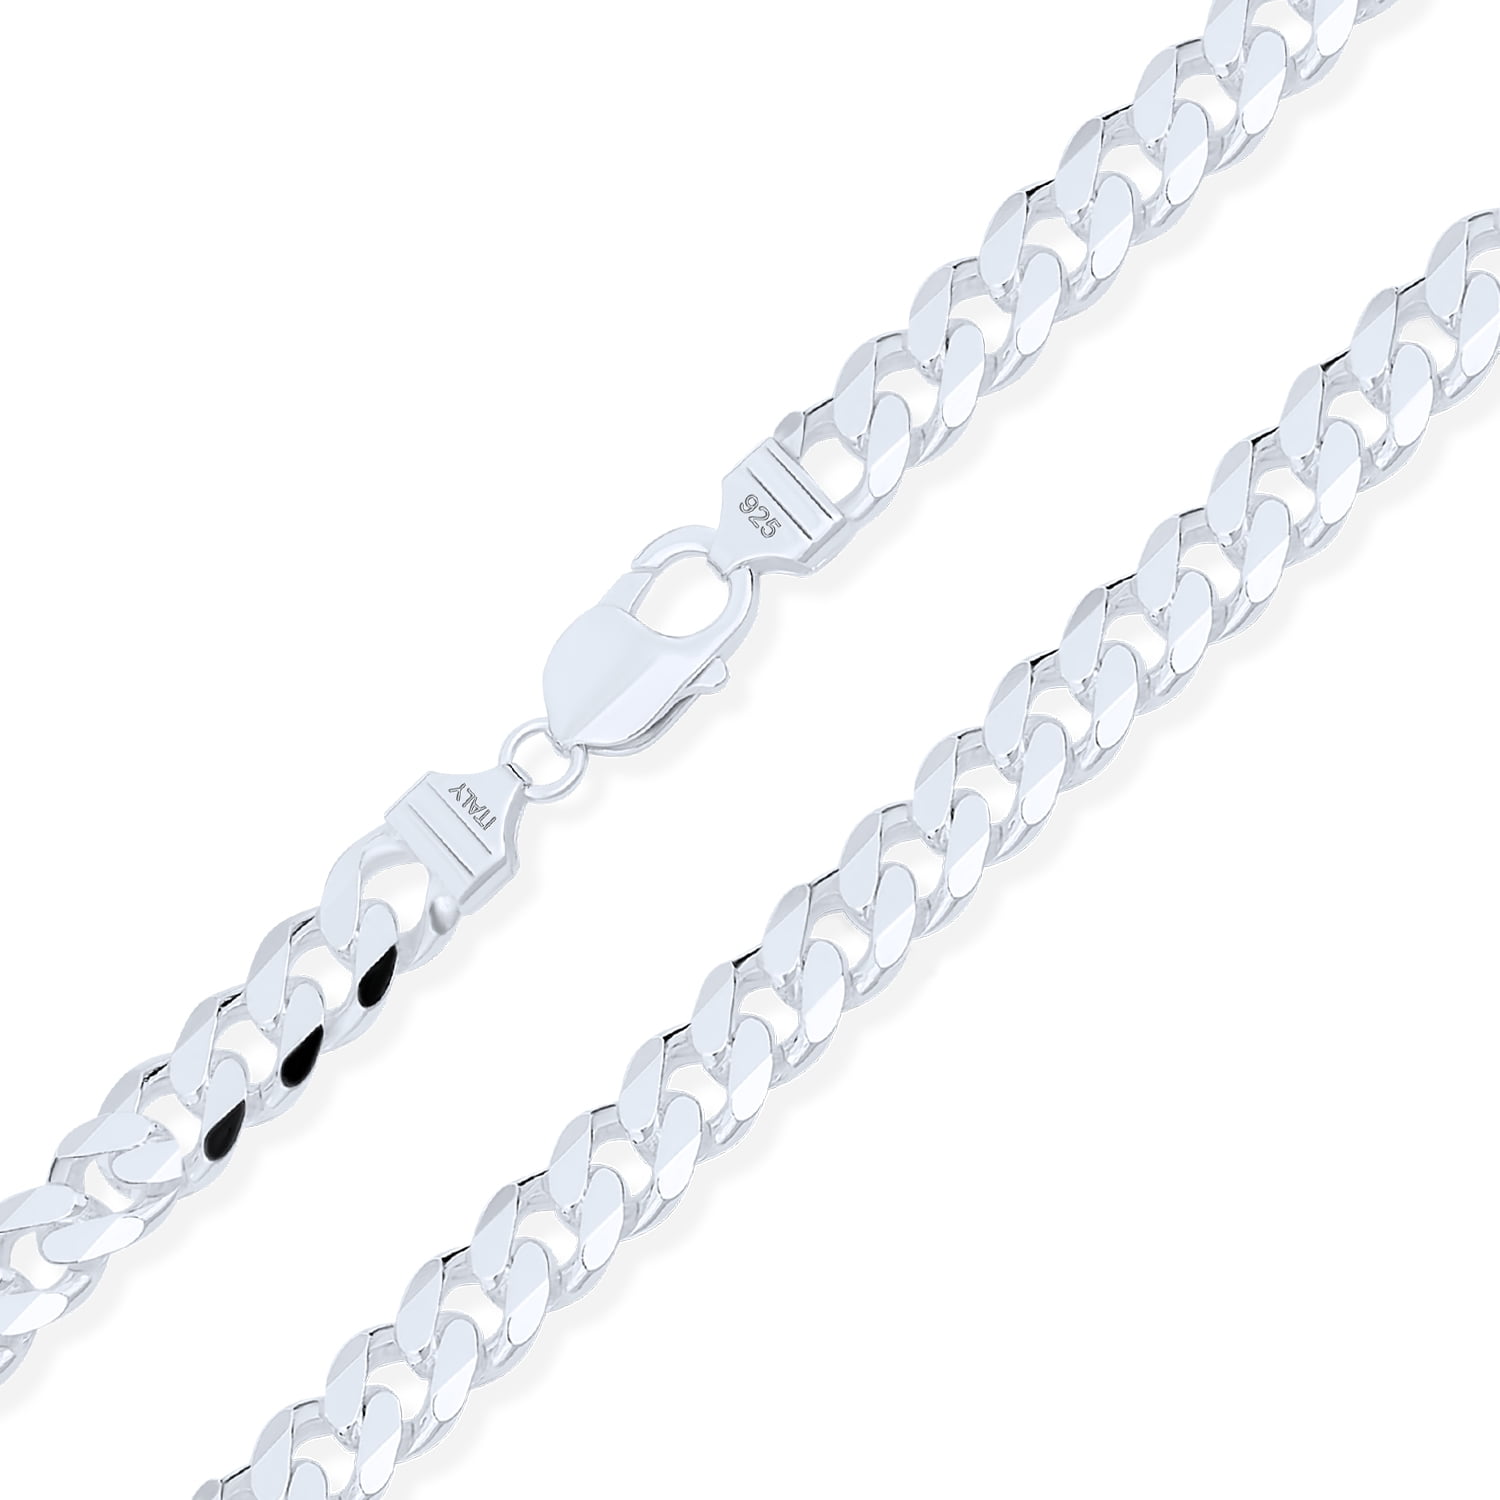 UNISEX MADE IN ITALY 925 sterling silver 2mm wide CURB 14"-40" CHAIN NECKLACE 